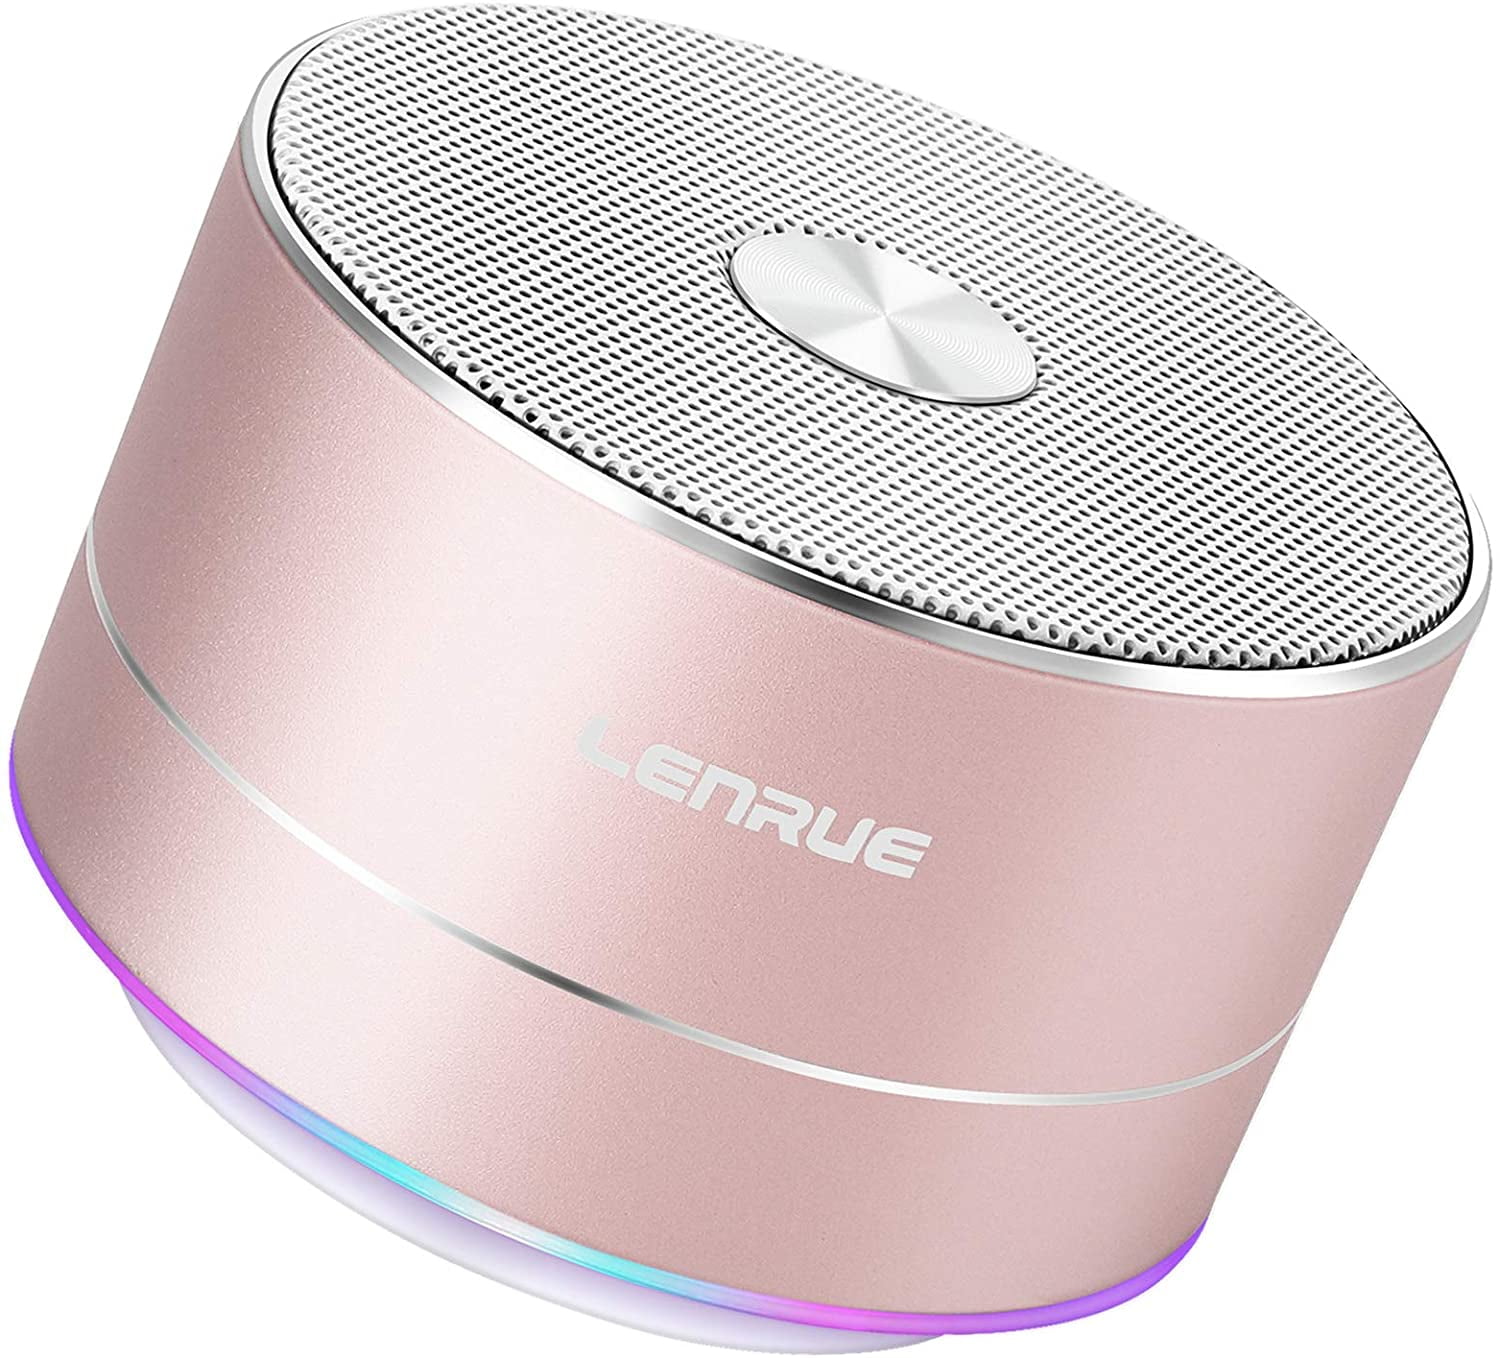 LENRUE Portable Wireless Bluetooth Speaker Bass and iPhone Smartphone Sound Android Ipad Call,AUX Line,TF Built-in-Mic,Handsfree Card,HD and for More with